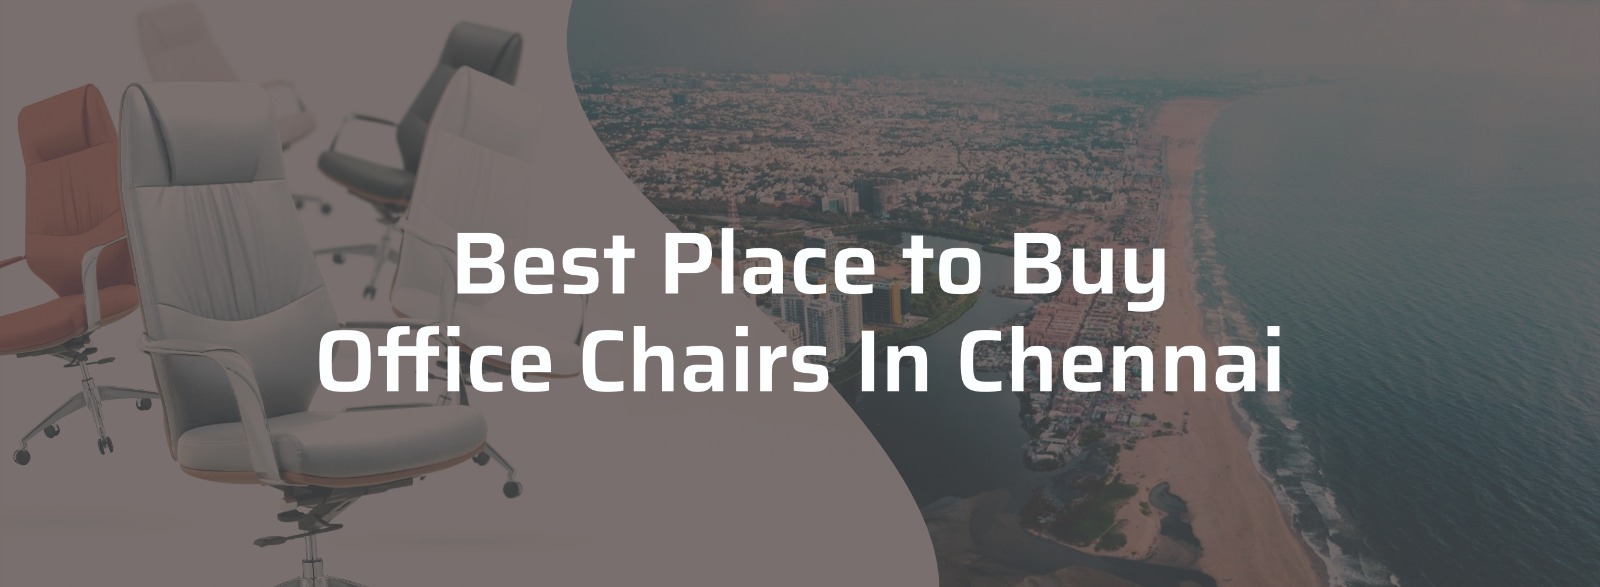 office chairs in chennai